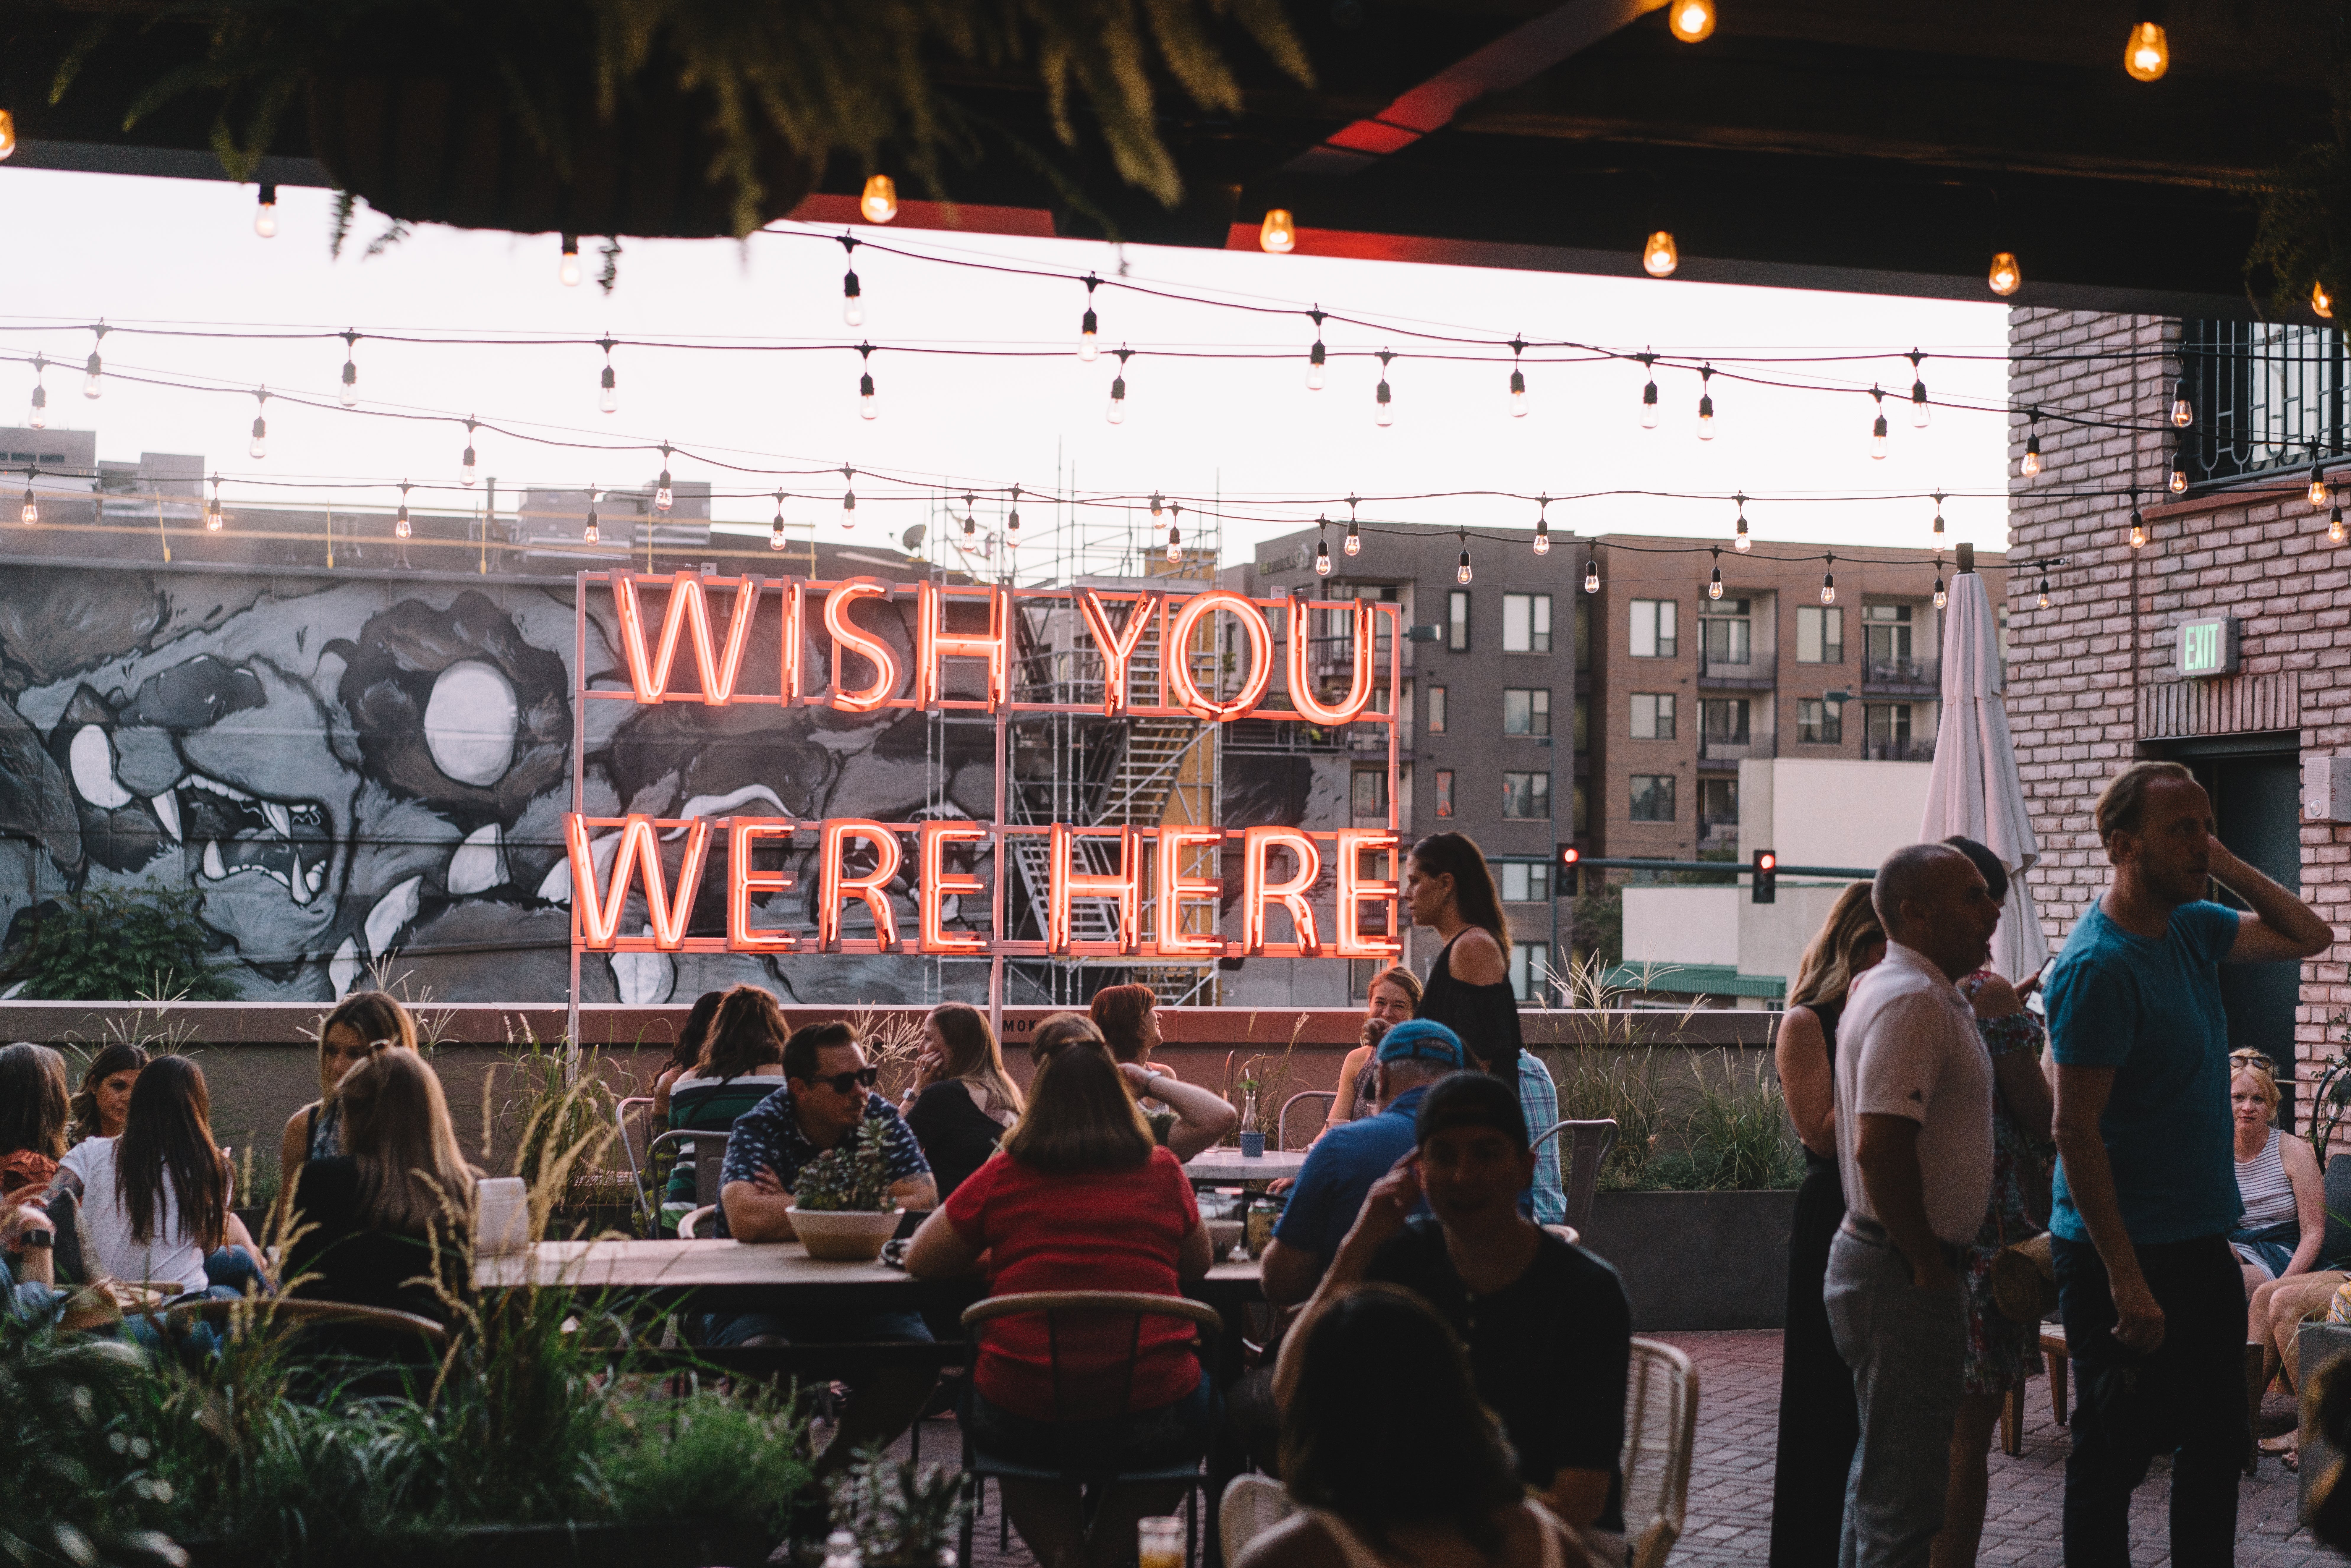 The Garden’s neon ‘Wish you were here’ sign is a perfect backdrop for an Instagram post